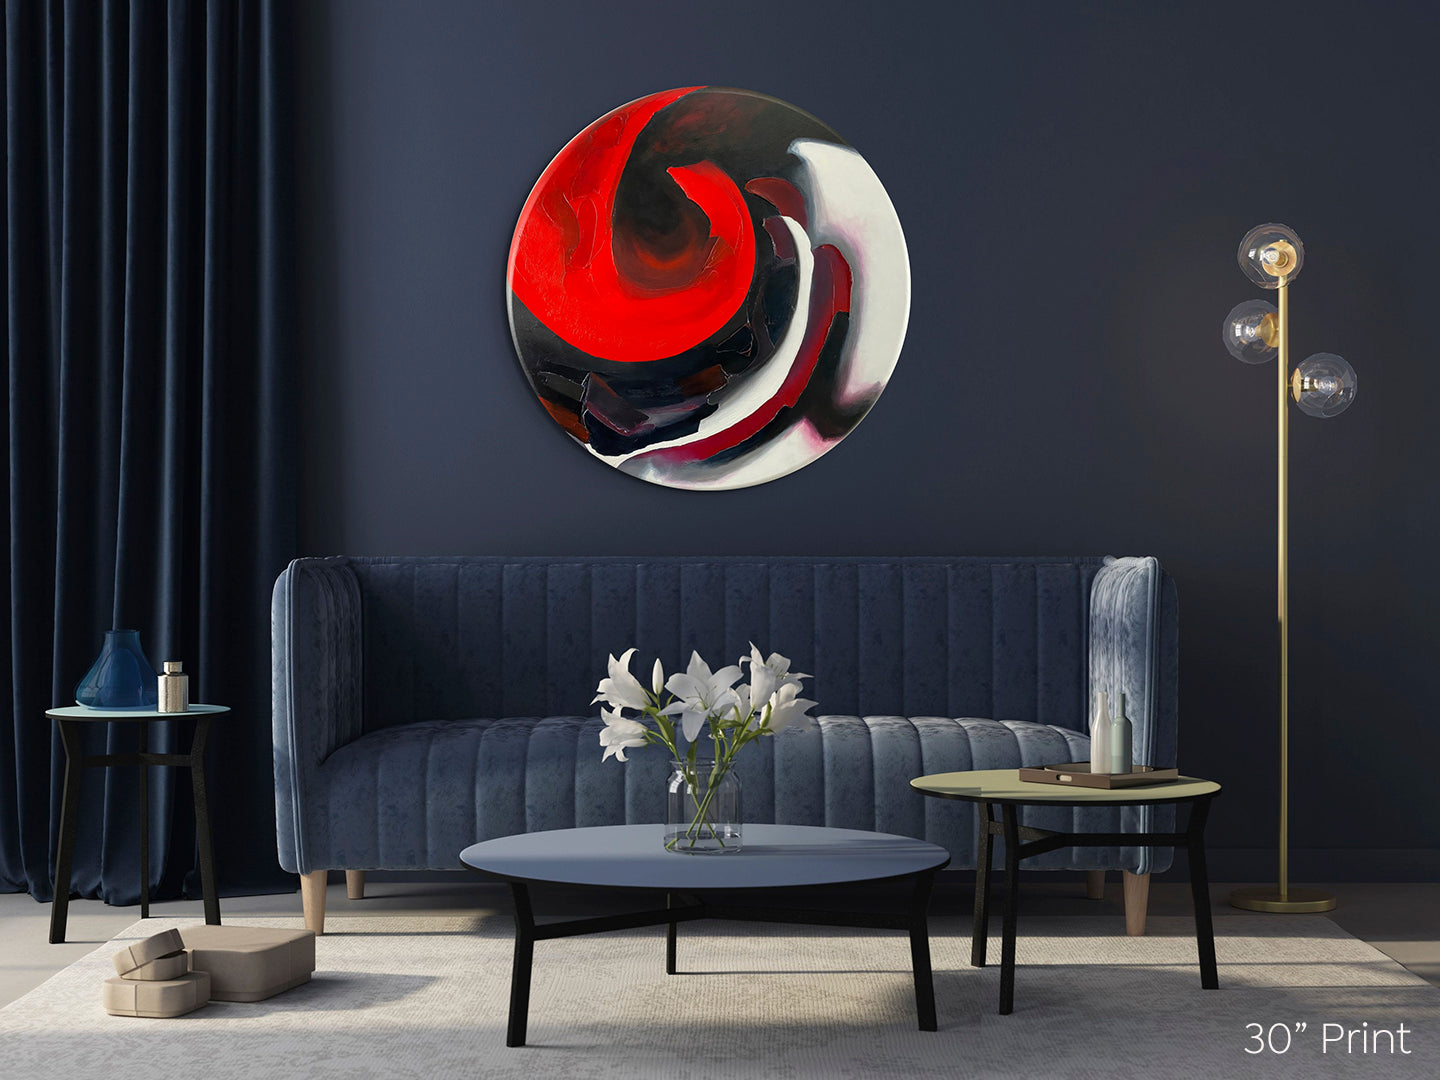 Abstract, acrylic and mixed-media 30” original or print on a round canvas with curved-edges shown on a dark grey wall in a contemporary living room.